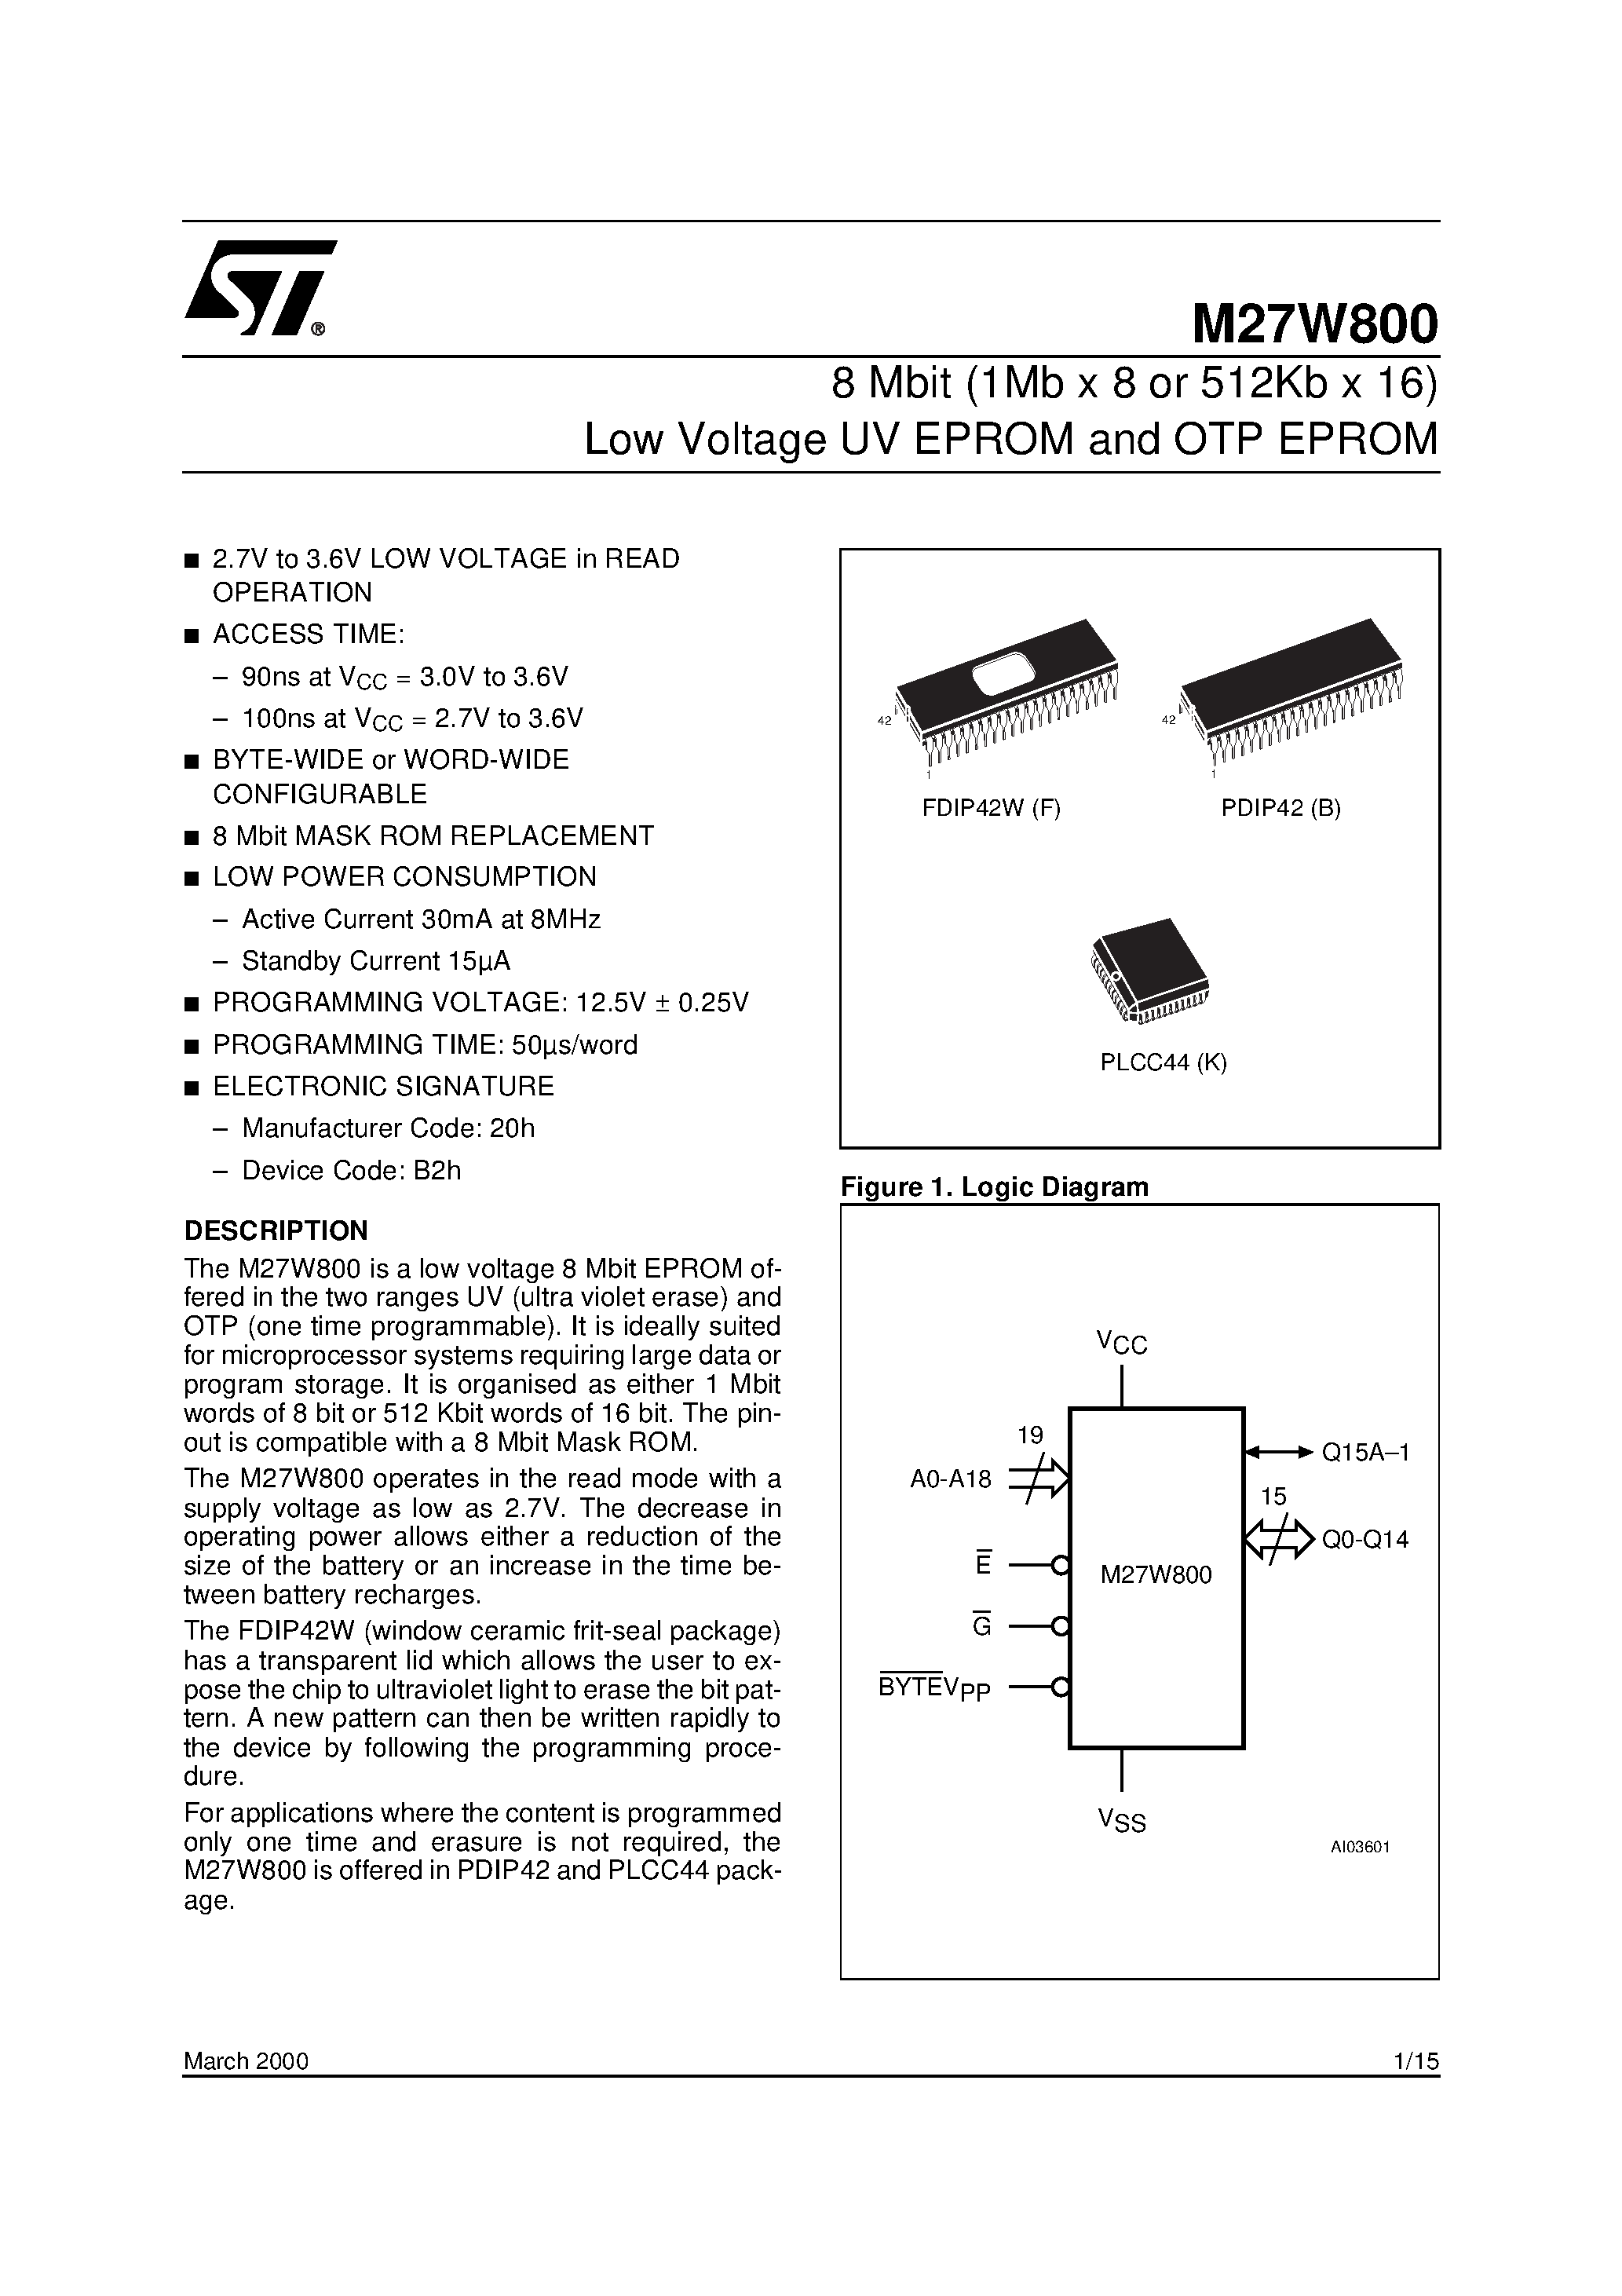 Datasheet M27W800-150F6TR - 8 Mbit 1Mb x 8 or 512Kb x 16 Low Voltage UV EPROM and OTP EPROM page 1